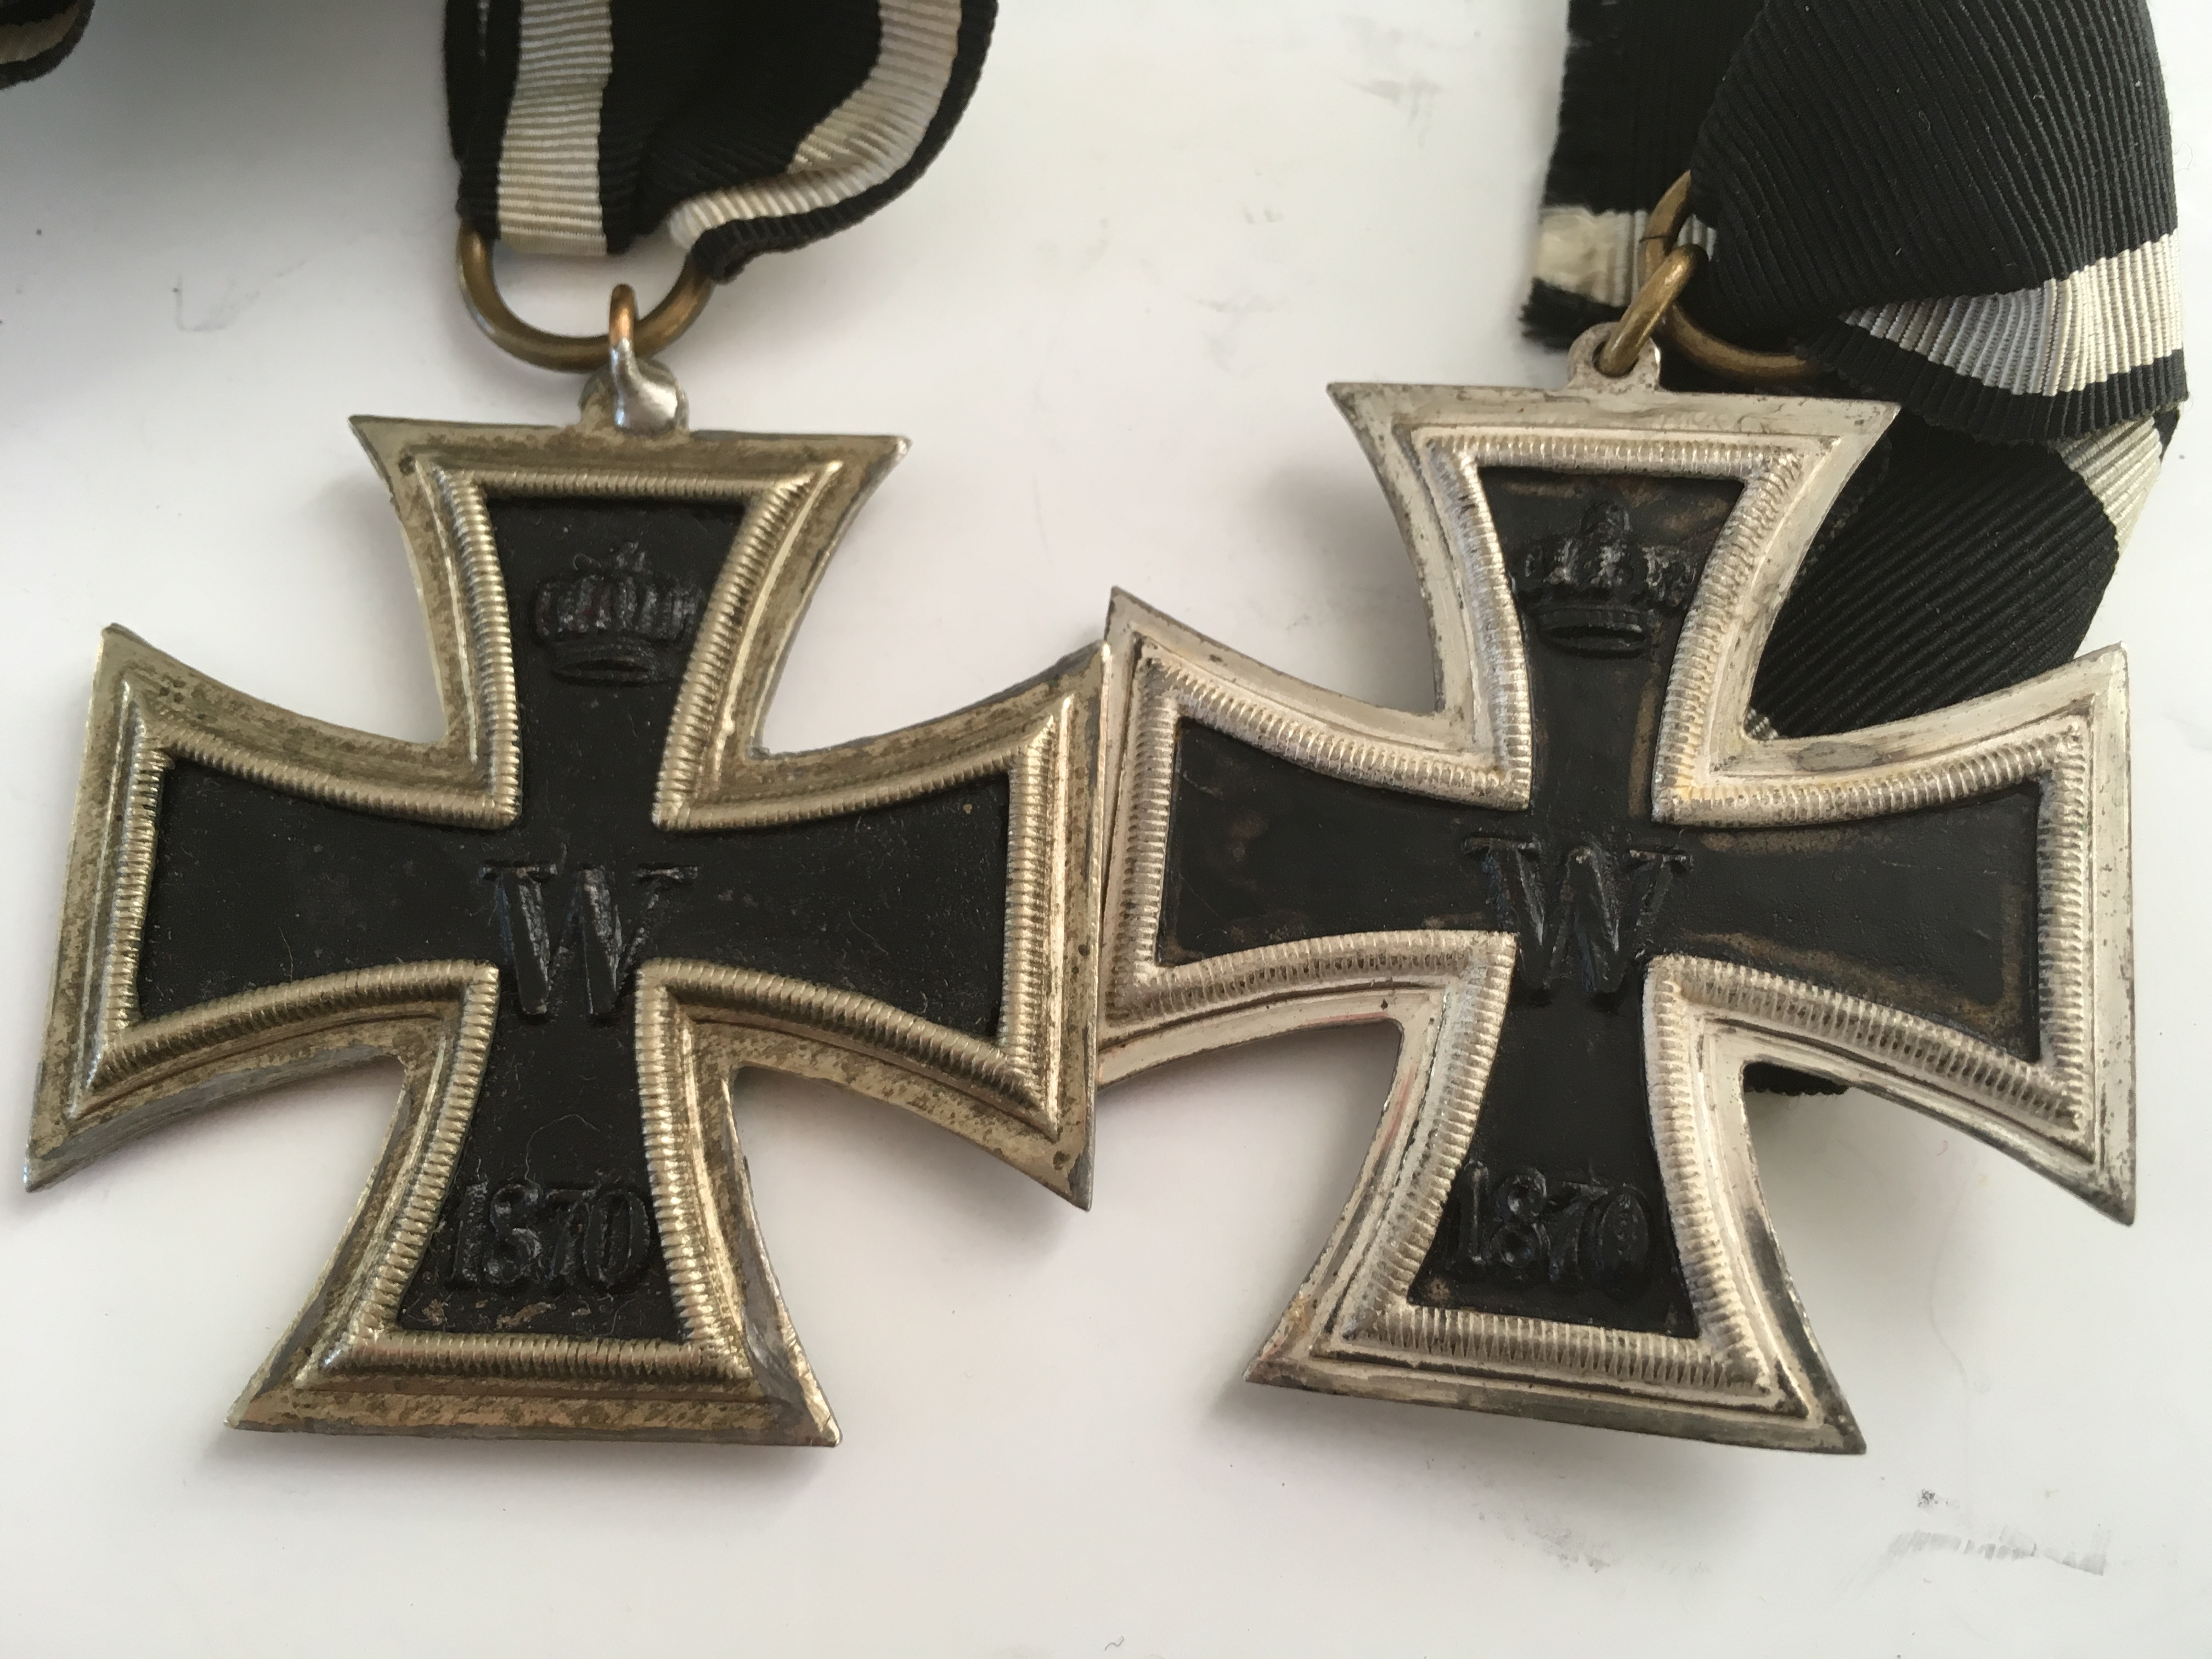 MEDALS: GERMAN WW1 MERIT CROSS FOR WAR AID (NO RIBBON), TWO IRON CROSS 1870, - Image 5 of 7